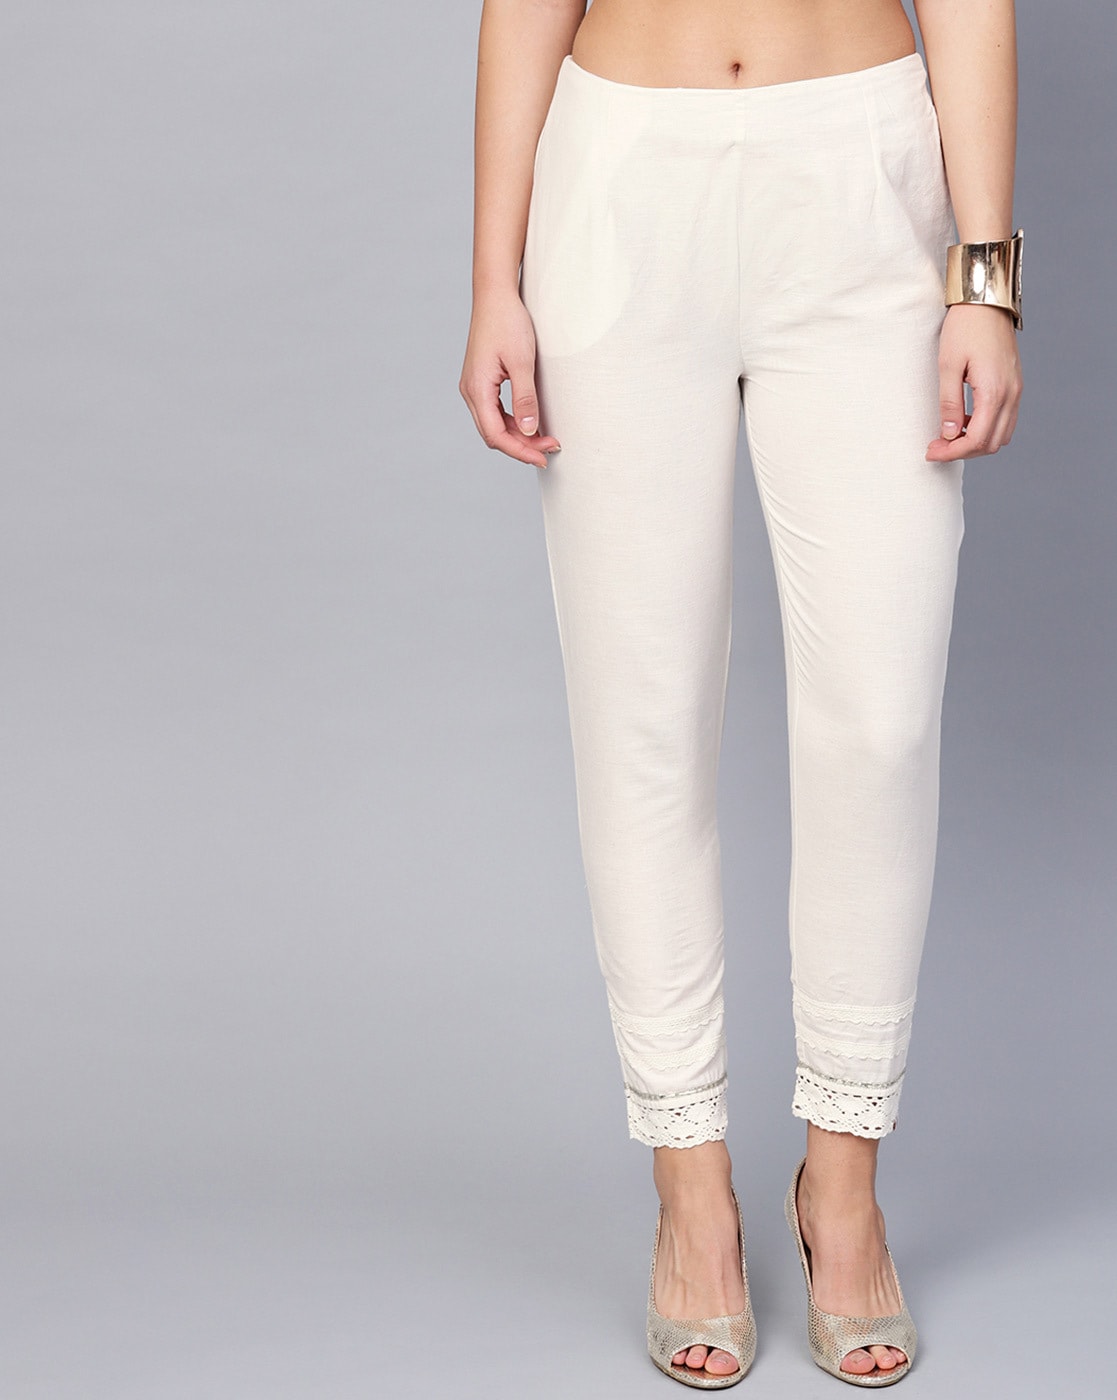 Ankle-Length Pants with Insert Pockets